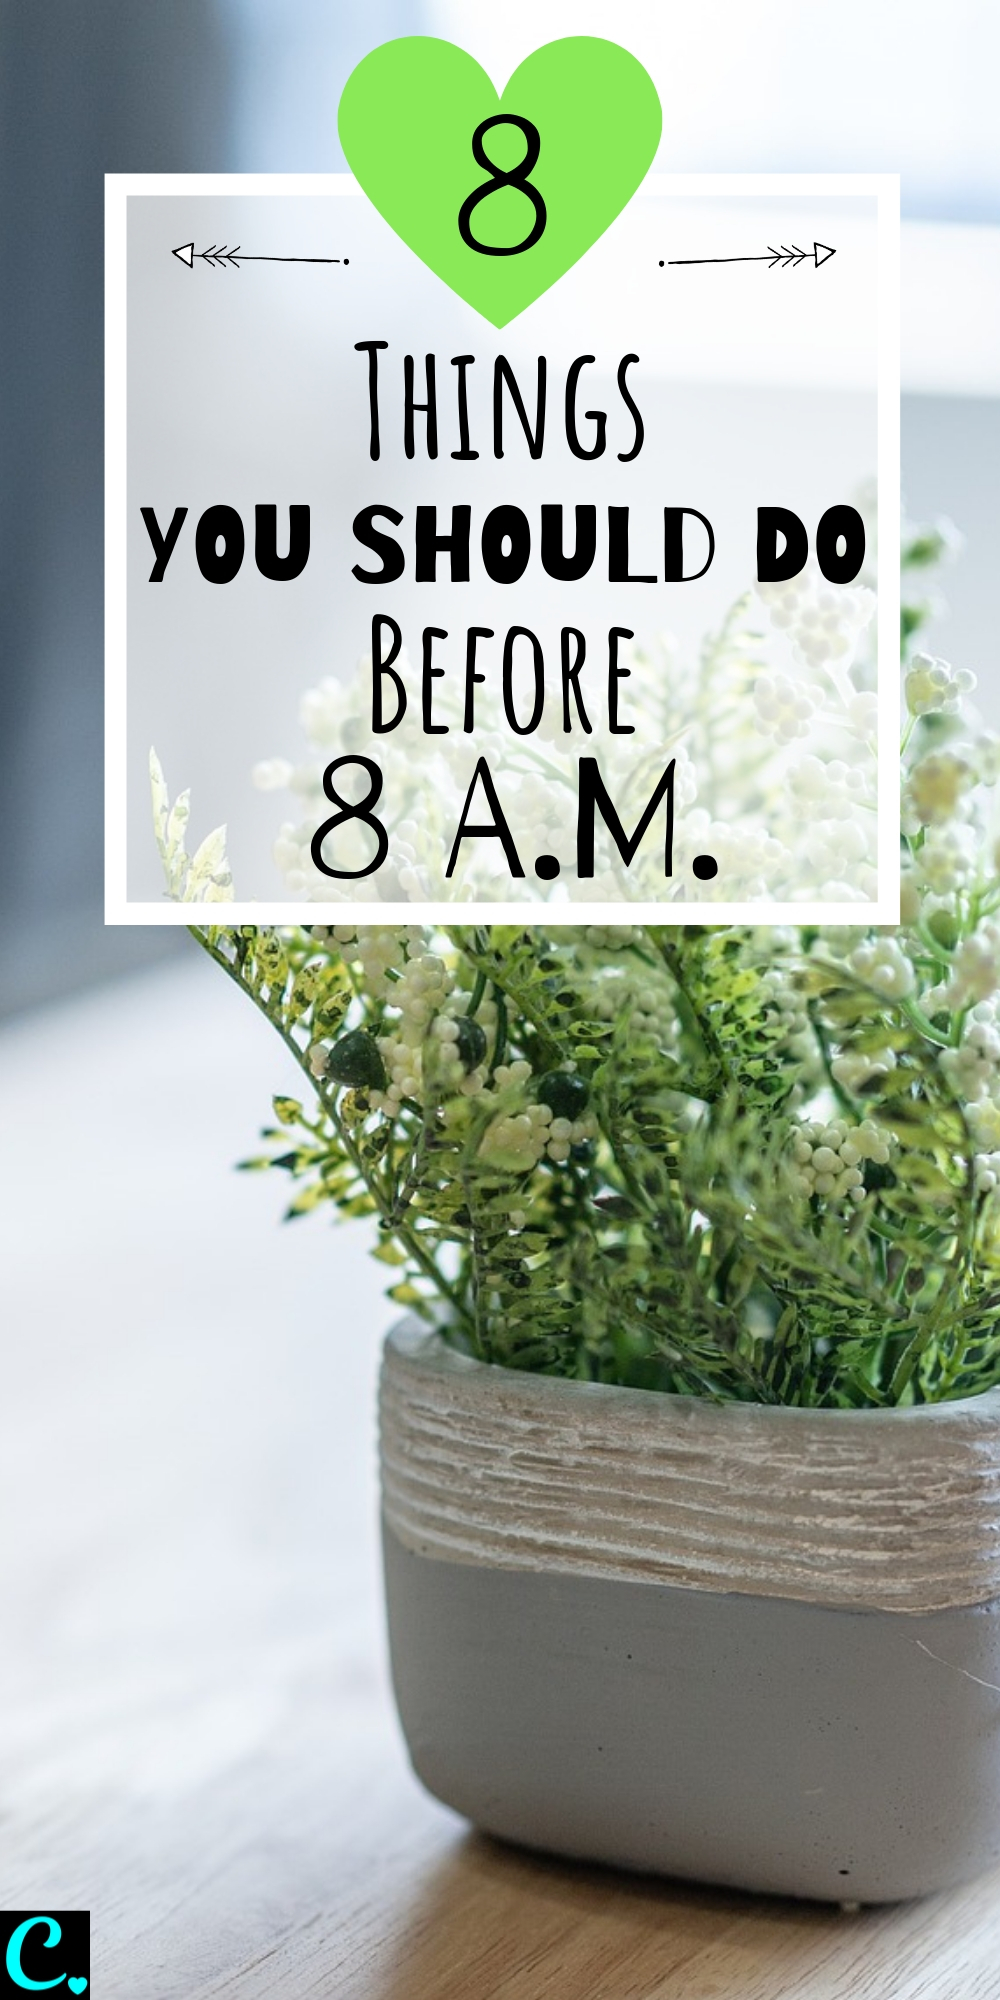 The Best Morning Routine: 8 Things To Do Before 8 A.M. | How to be productive | Personal development | Productivity tips | Habits for success | Via: https://captivatingcrazy.com #captivatingcrazy 